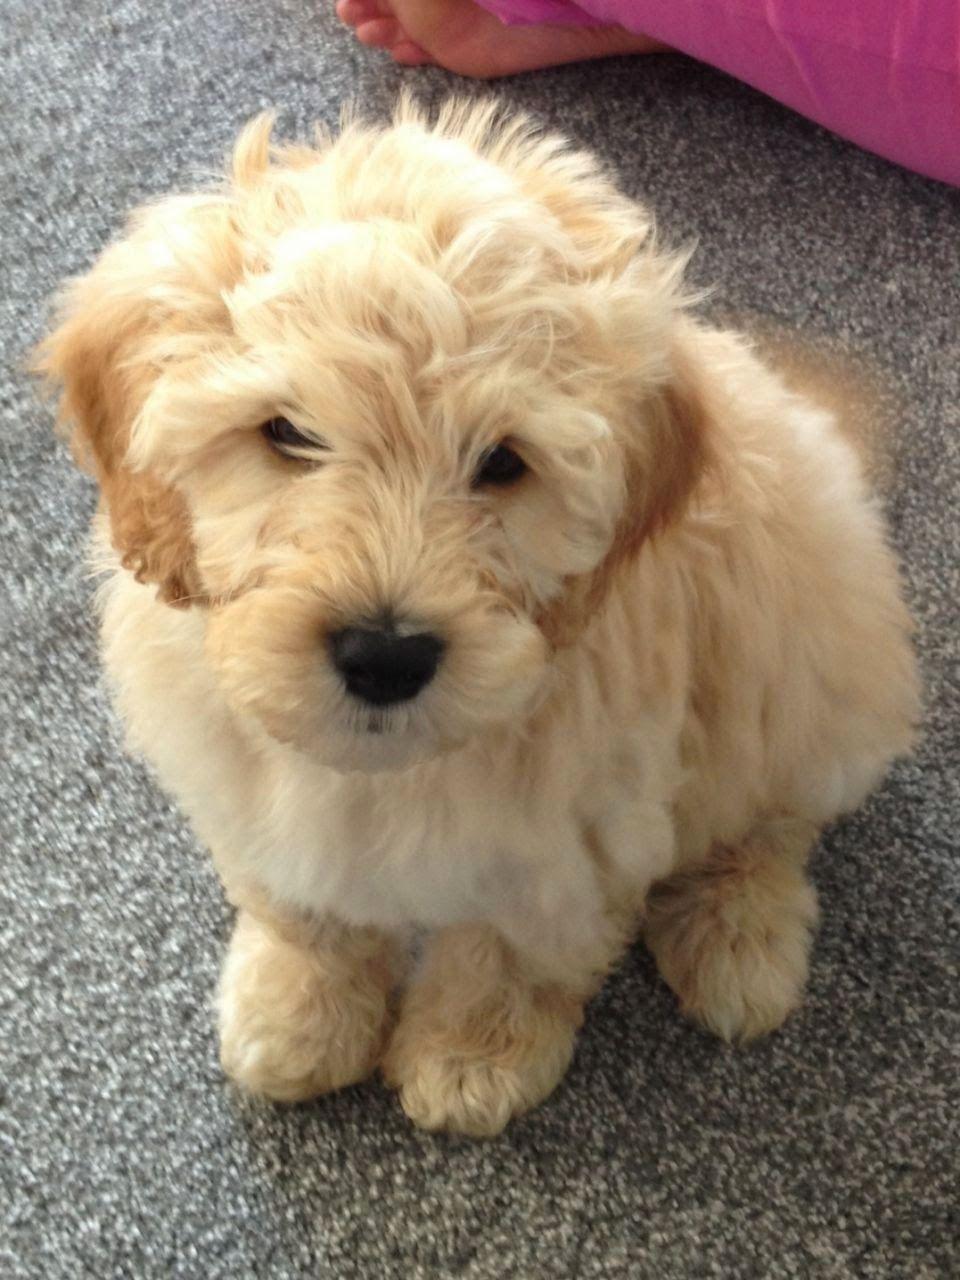 Rules of the Jungle: Labradoodle puppies